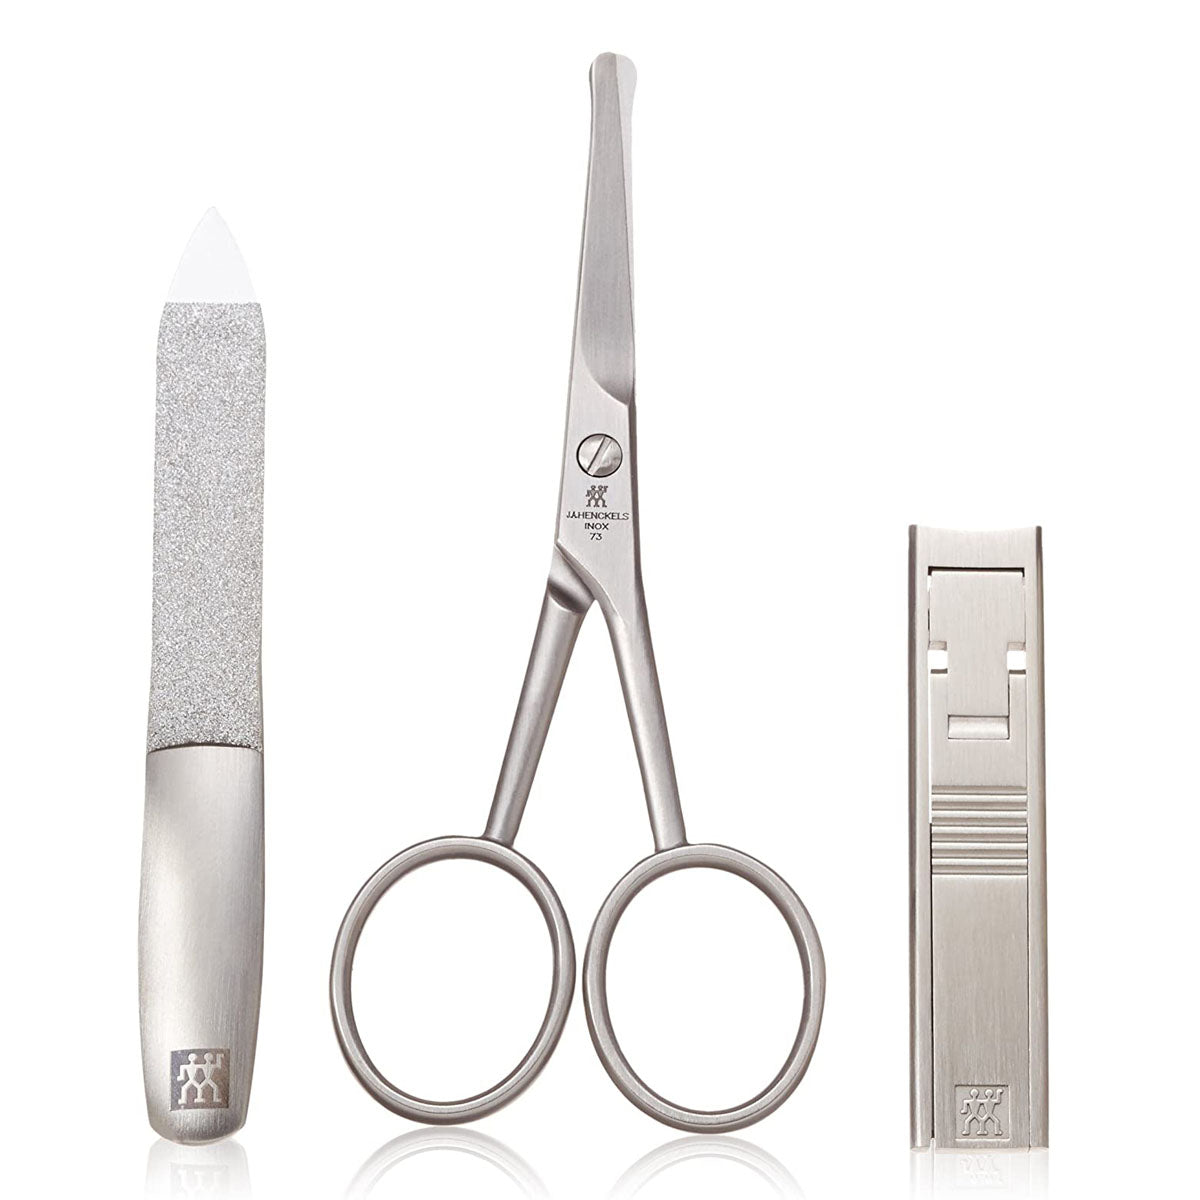 Zwilling J. A. Henckels nail clipper review 